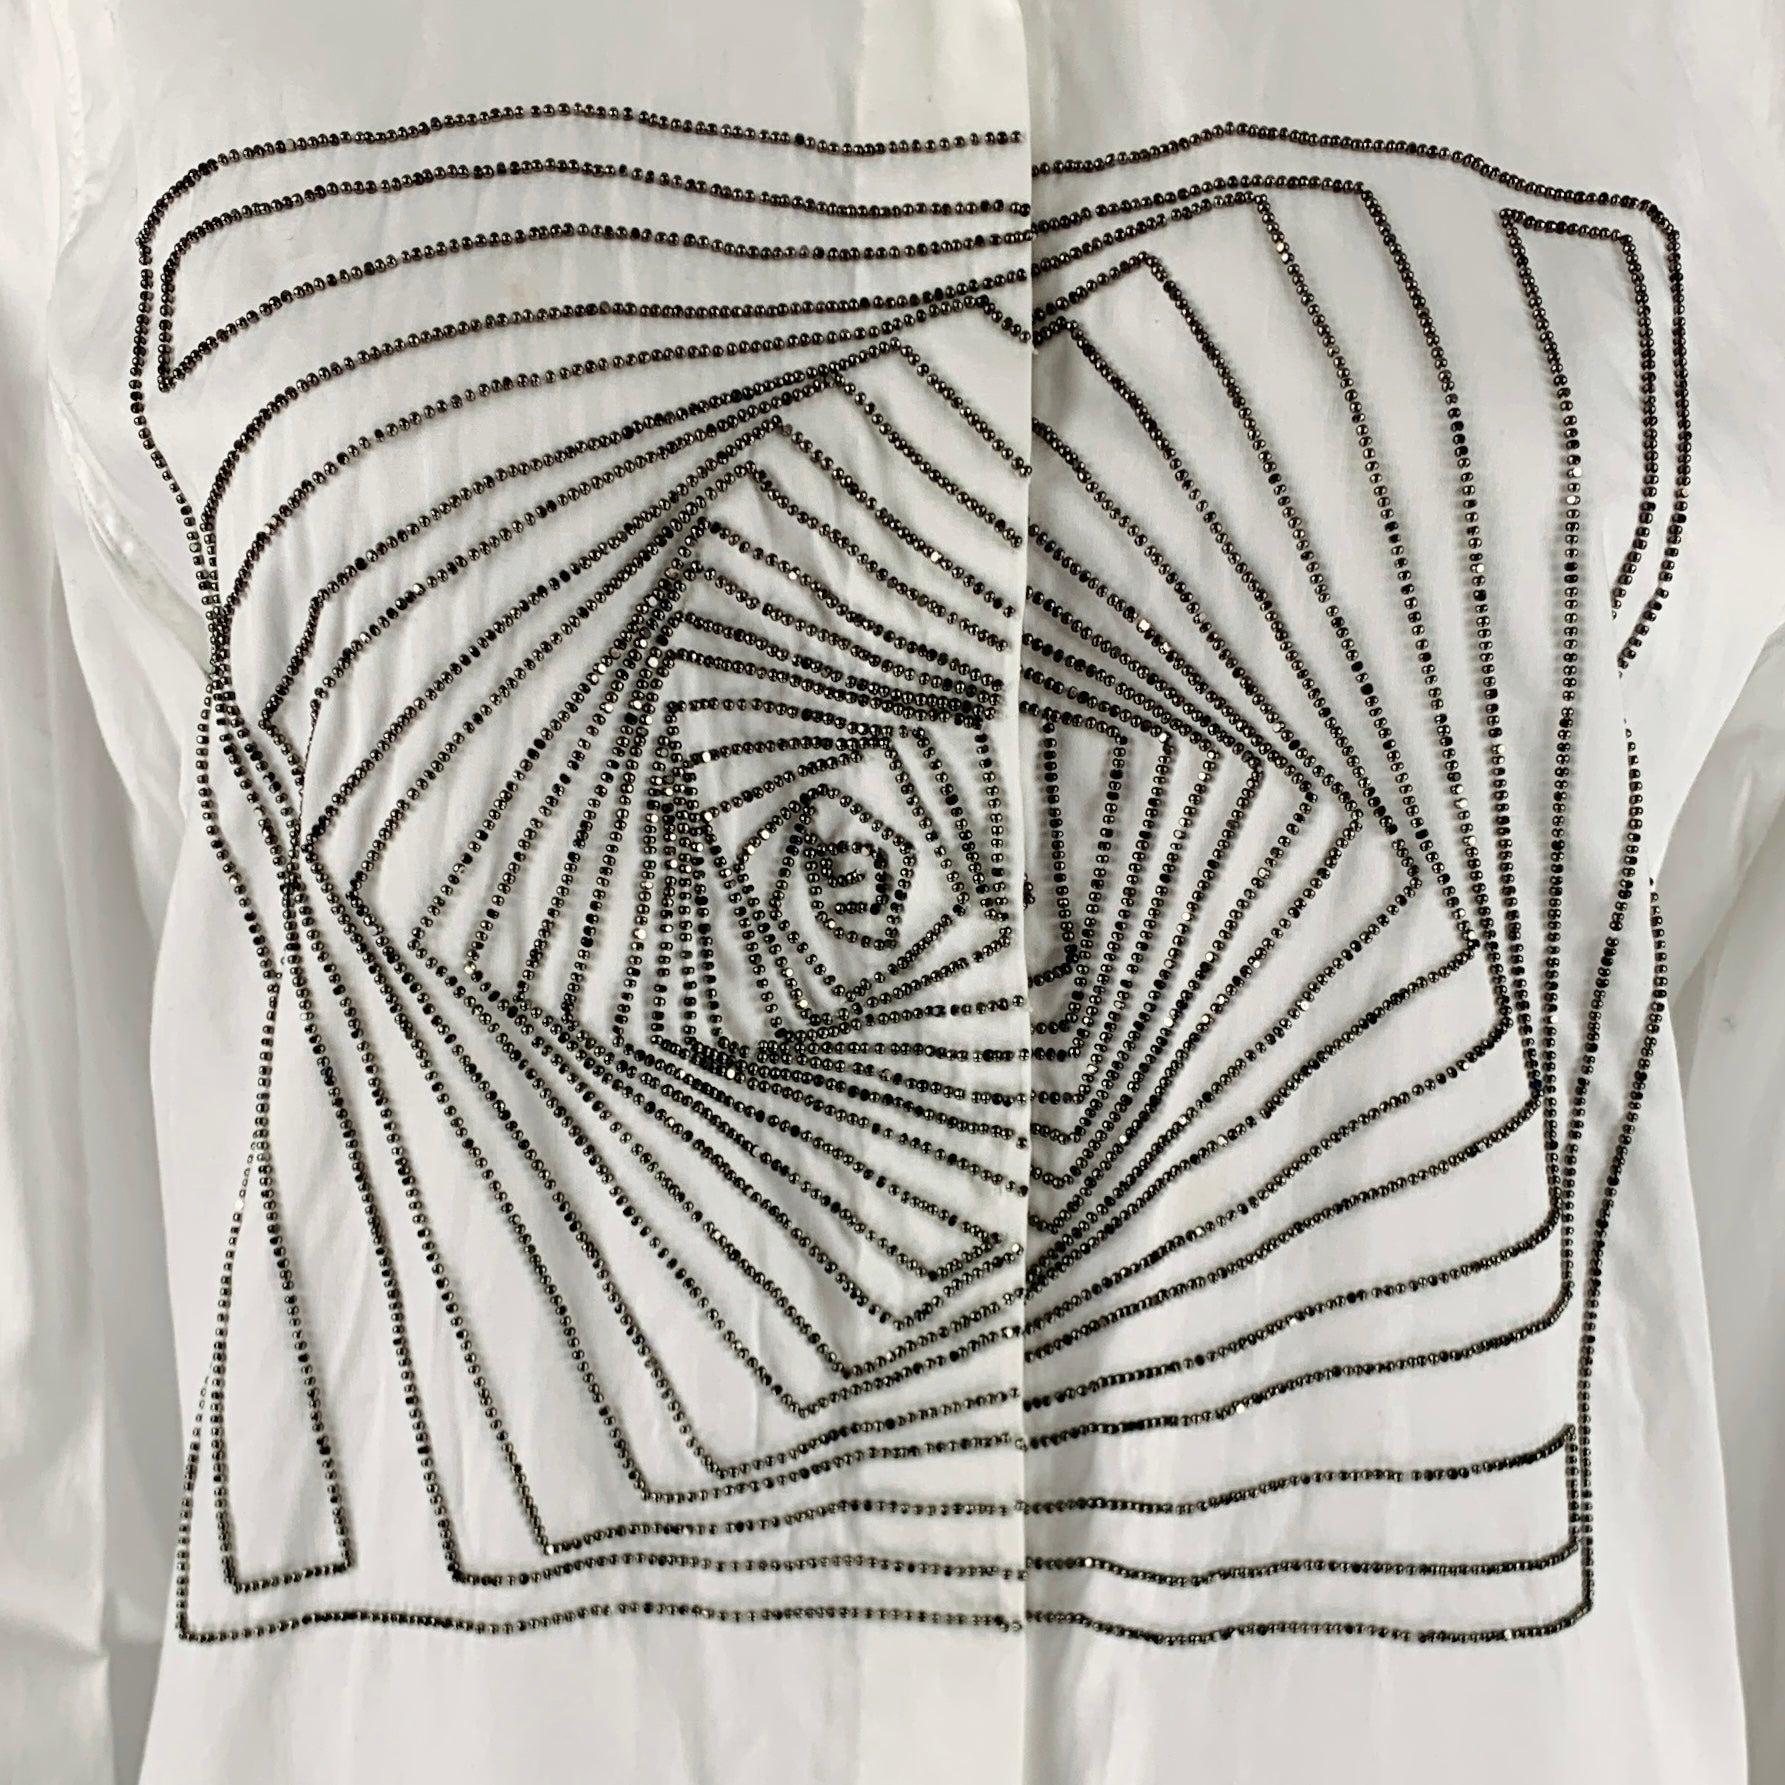 DRIES VAN NOTEN casual top
in a white cotton fabric featuring a silver tone beaded geometric design, long sleeves, and a hidden snap closure.Good Pre-Owned Condition.
Minor marks, please check photos. 

Marked:   38 

Measurements: 
 
Shoulder: 15.5